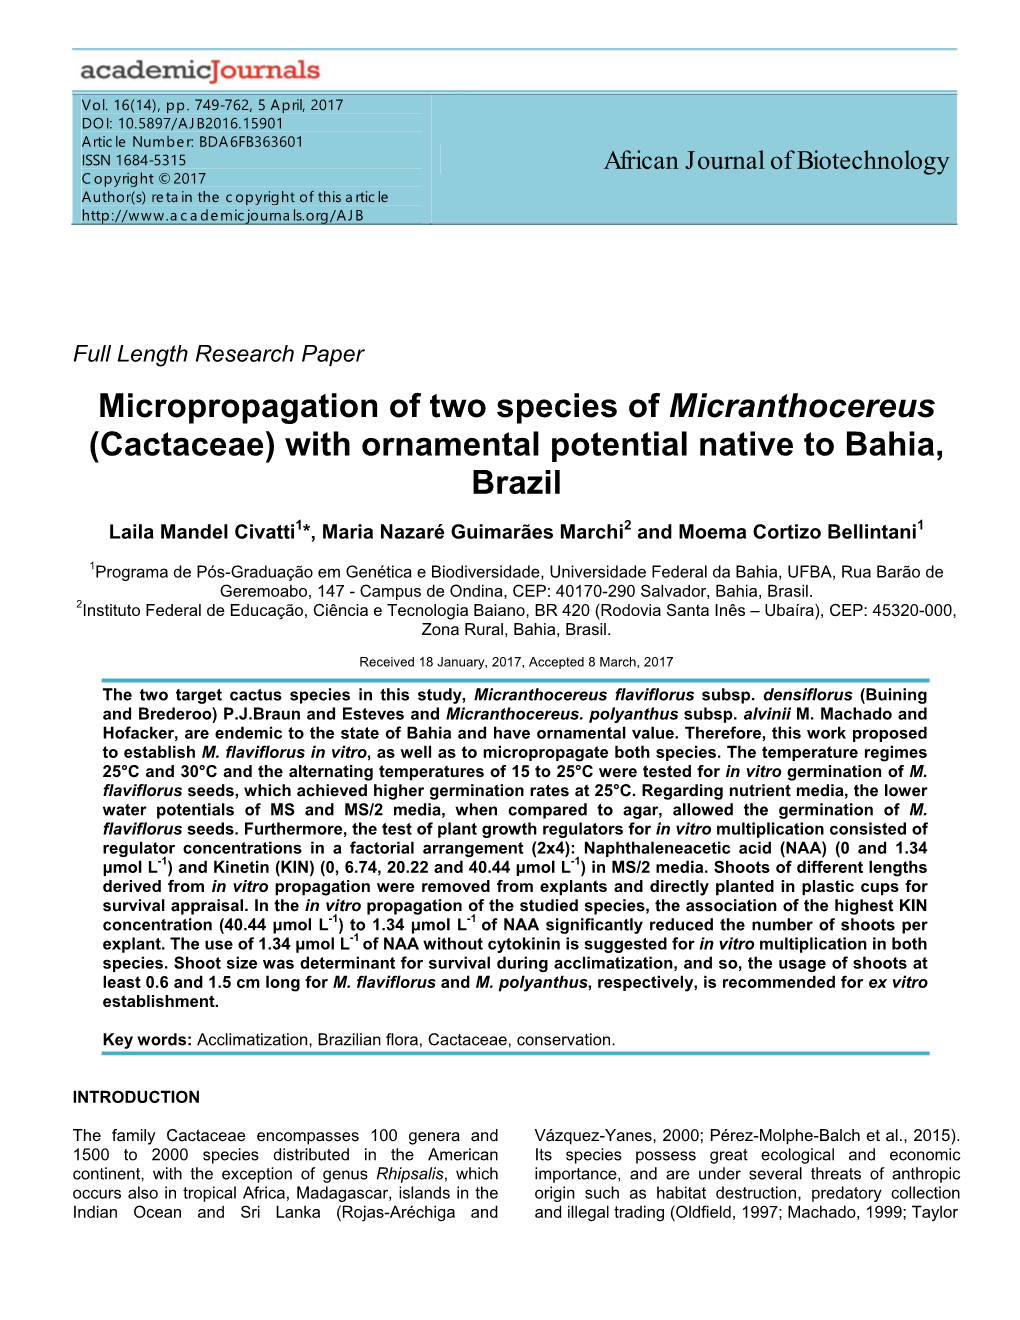 Micropropagation of Two Species of Micranthocereus (Cactaceae) with Ornamental Potential Native to Bahia, Brazil